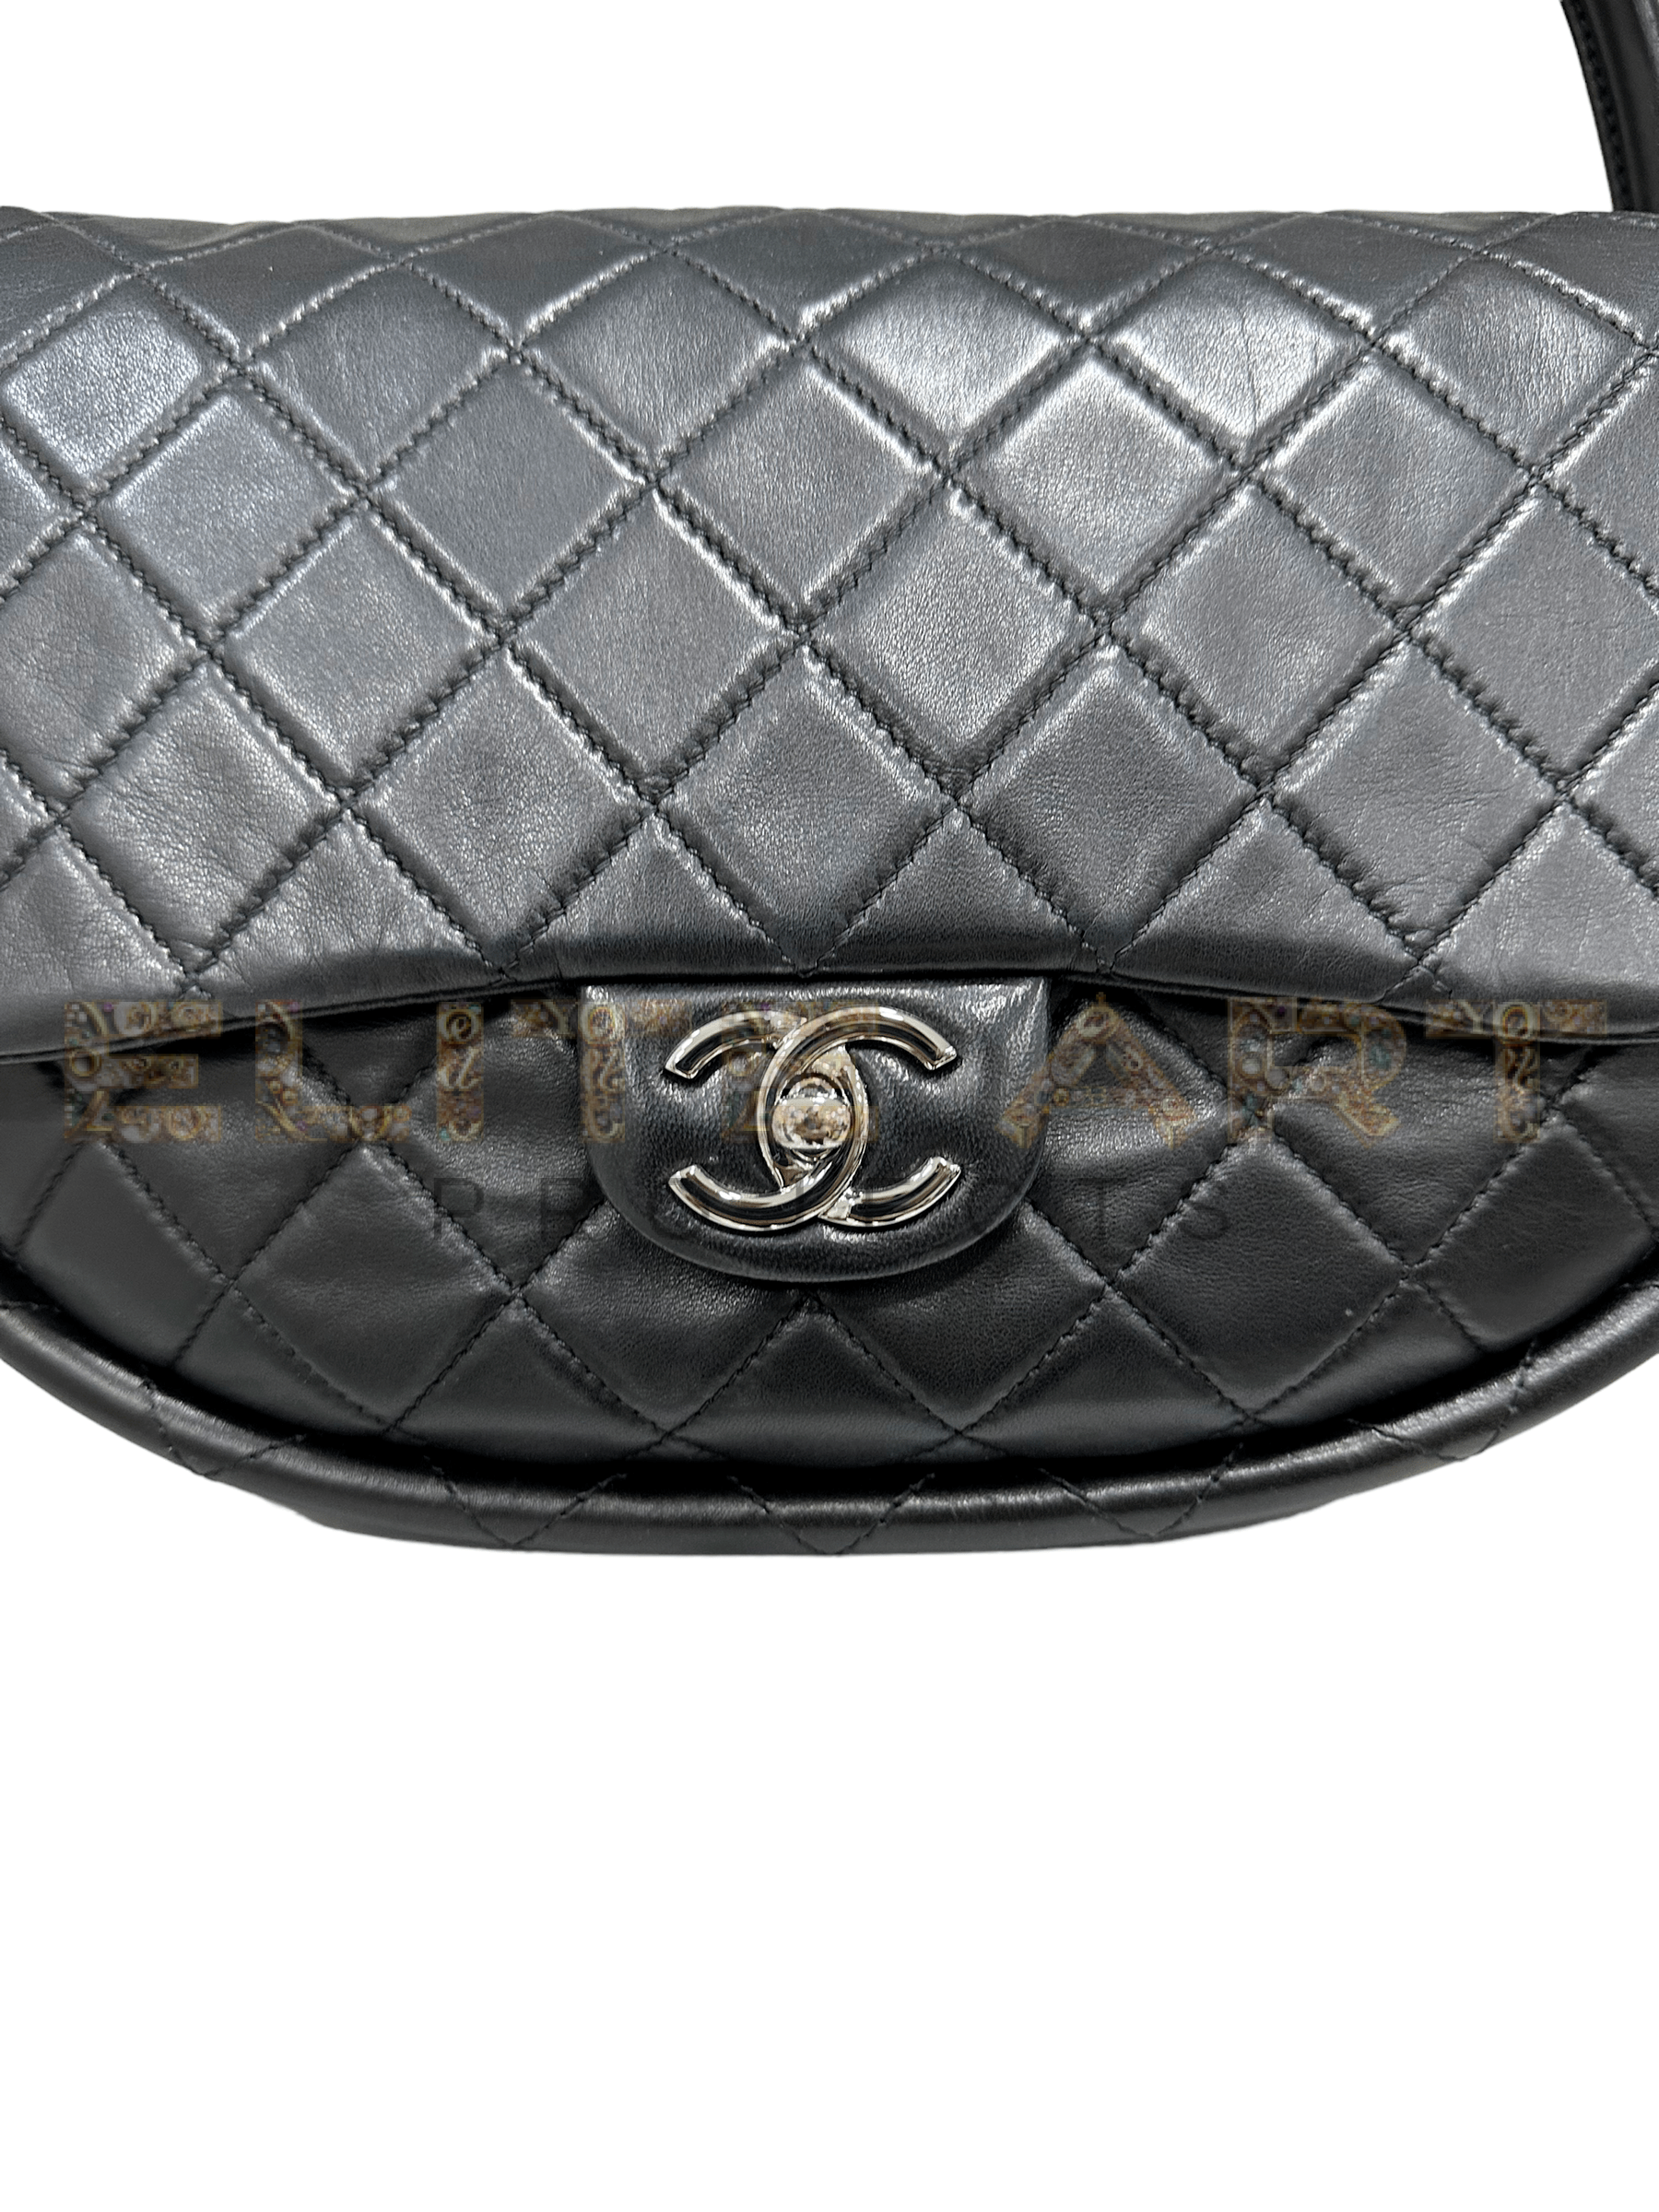 ELS Fashion TV, Elite Art Projects, Chanel, Hula Hop bag, black quilted leather, silver-tone hardware, CC logo clasp, grey fabric lining, spacious interior, 2012/13, out of production, good condition